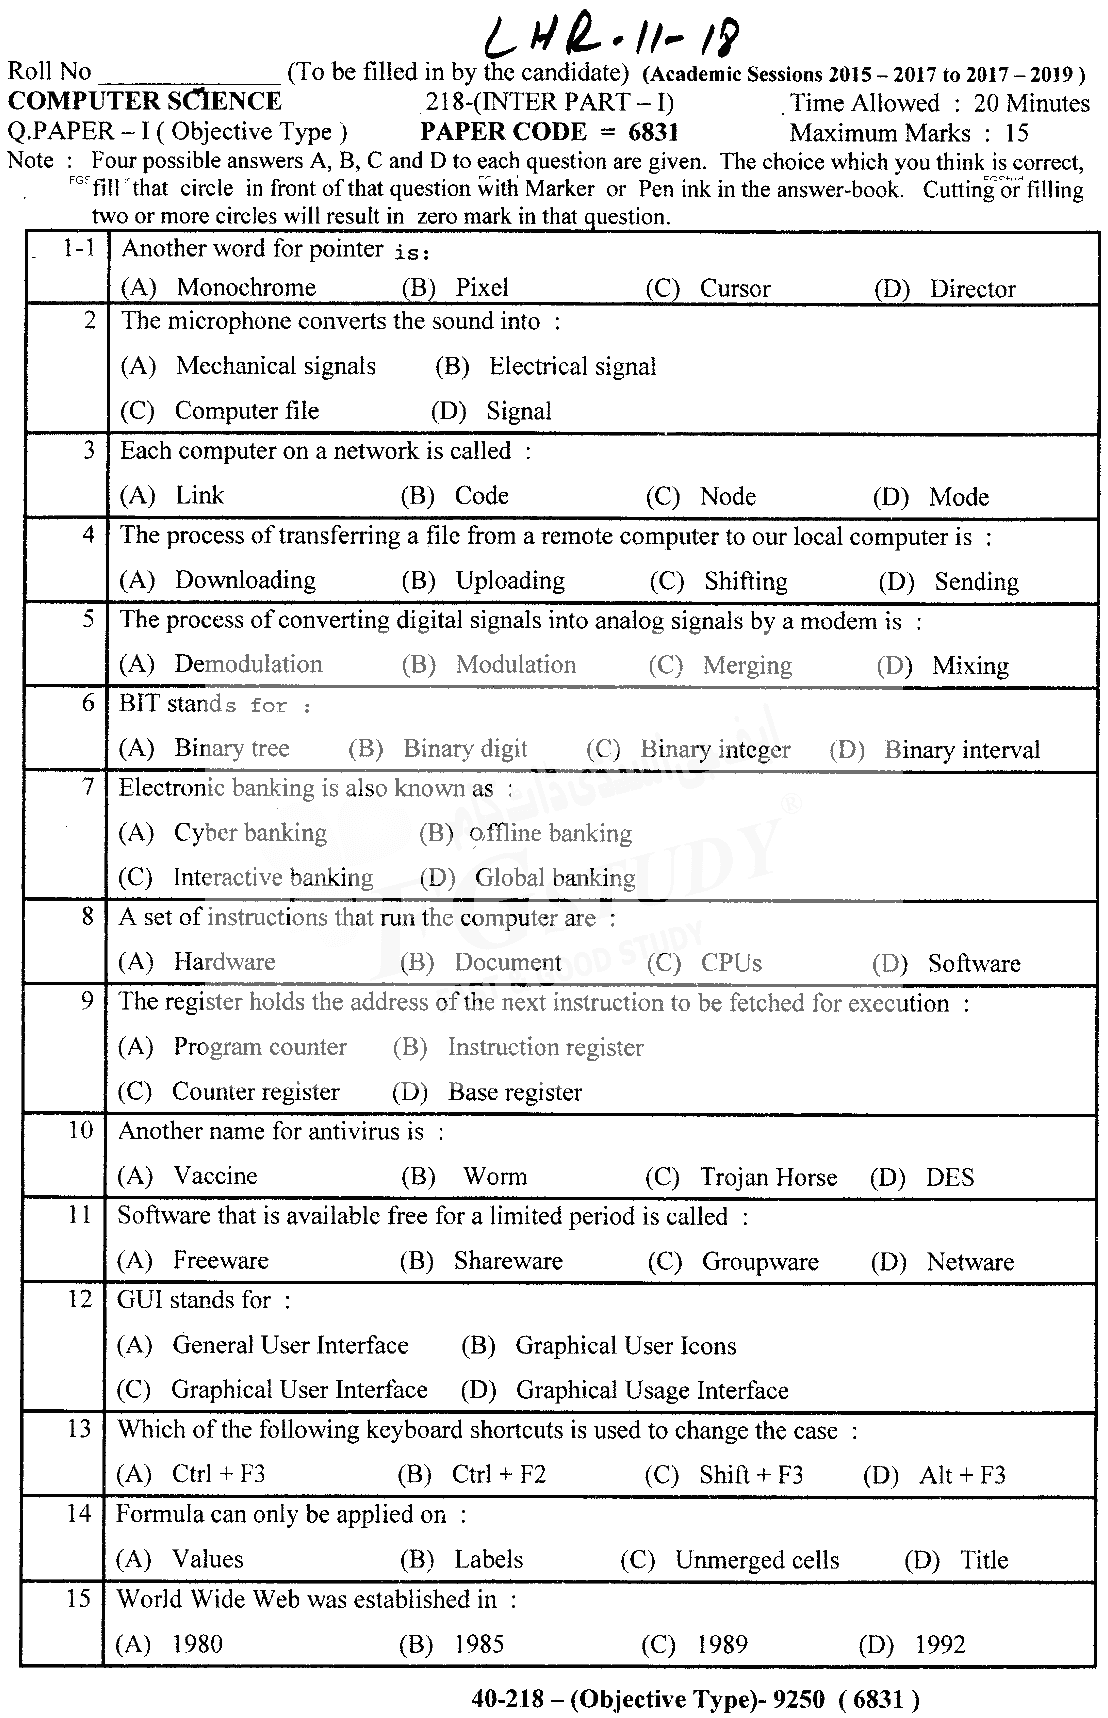 11th Class Computer Science Past Paper 2018 Lahore Board Objective